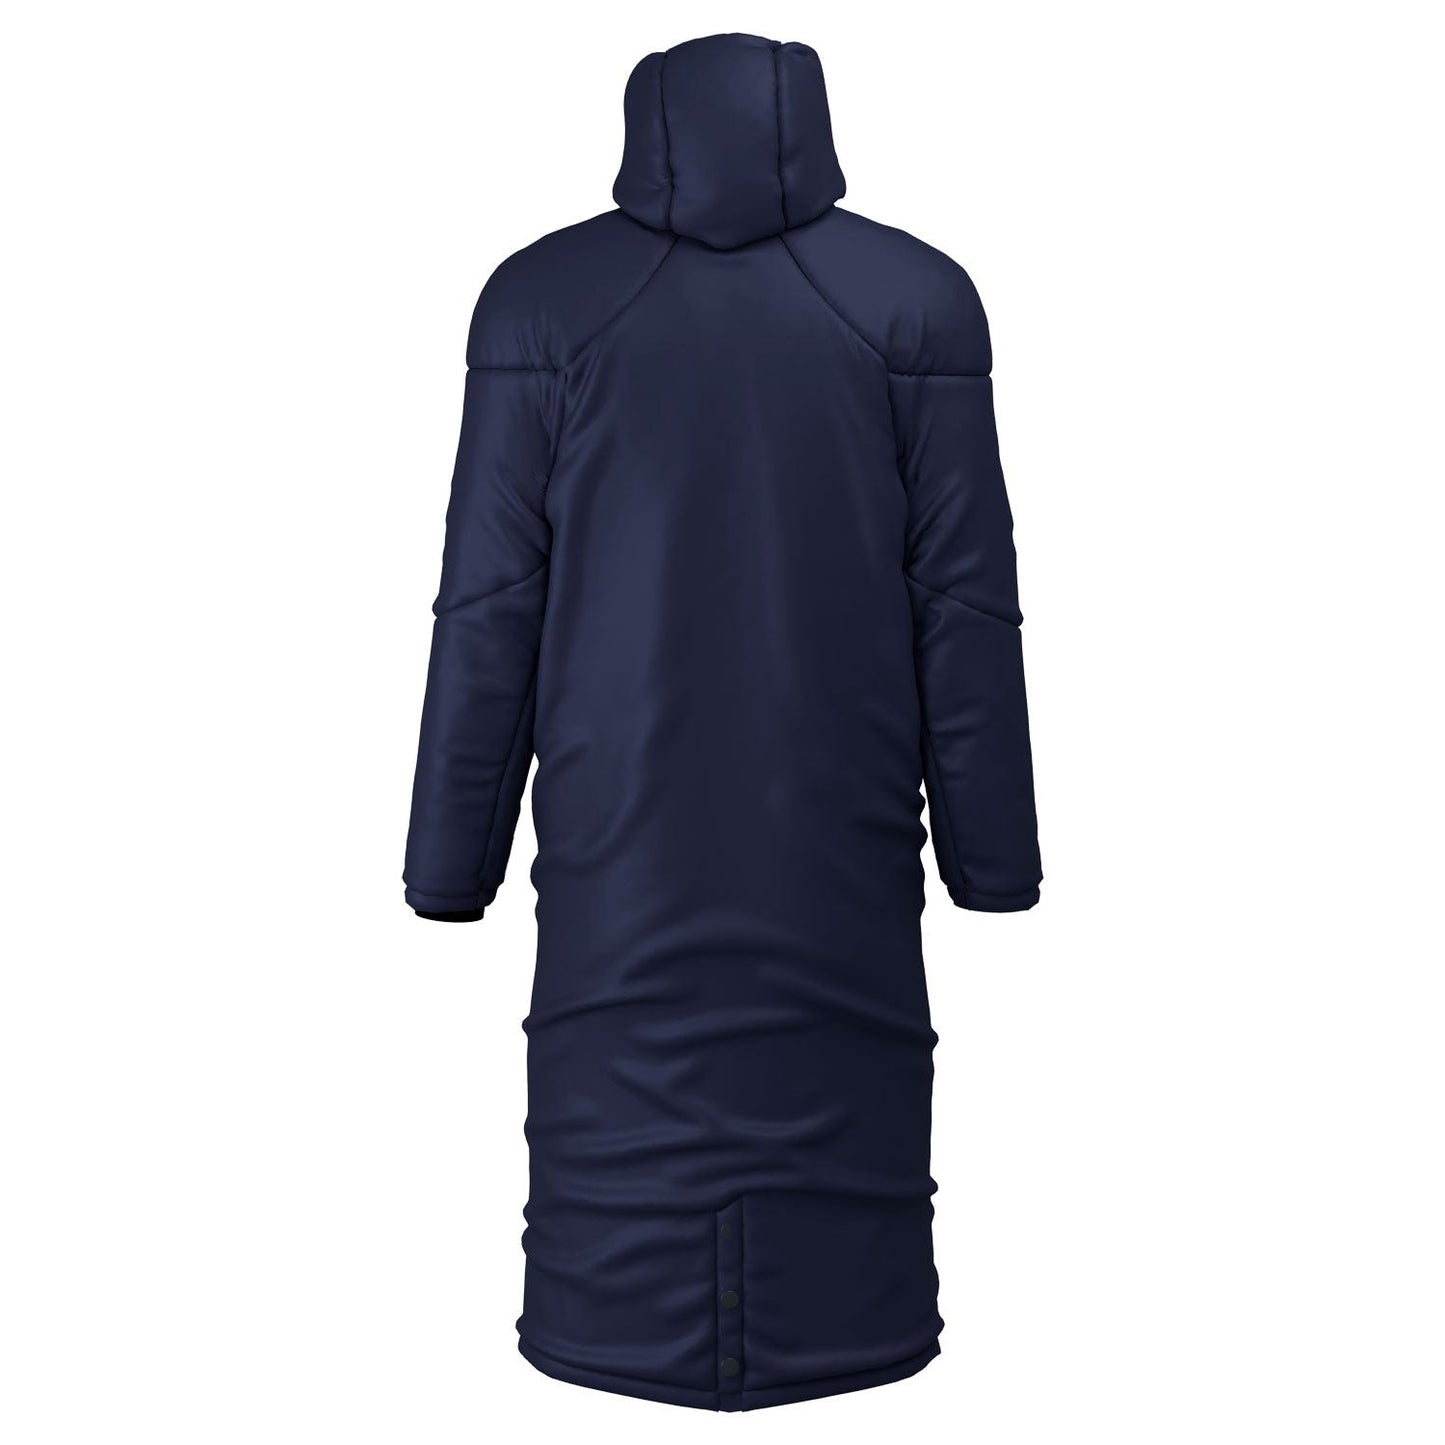 Deganwy Rowers Contoured Thermal Sub Coat